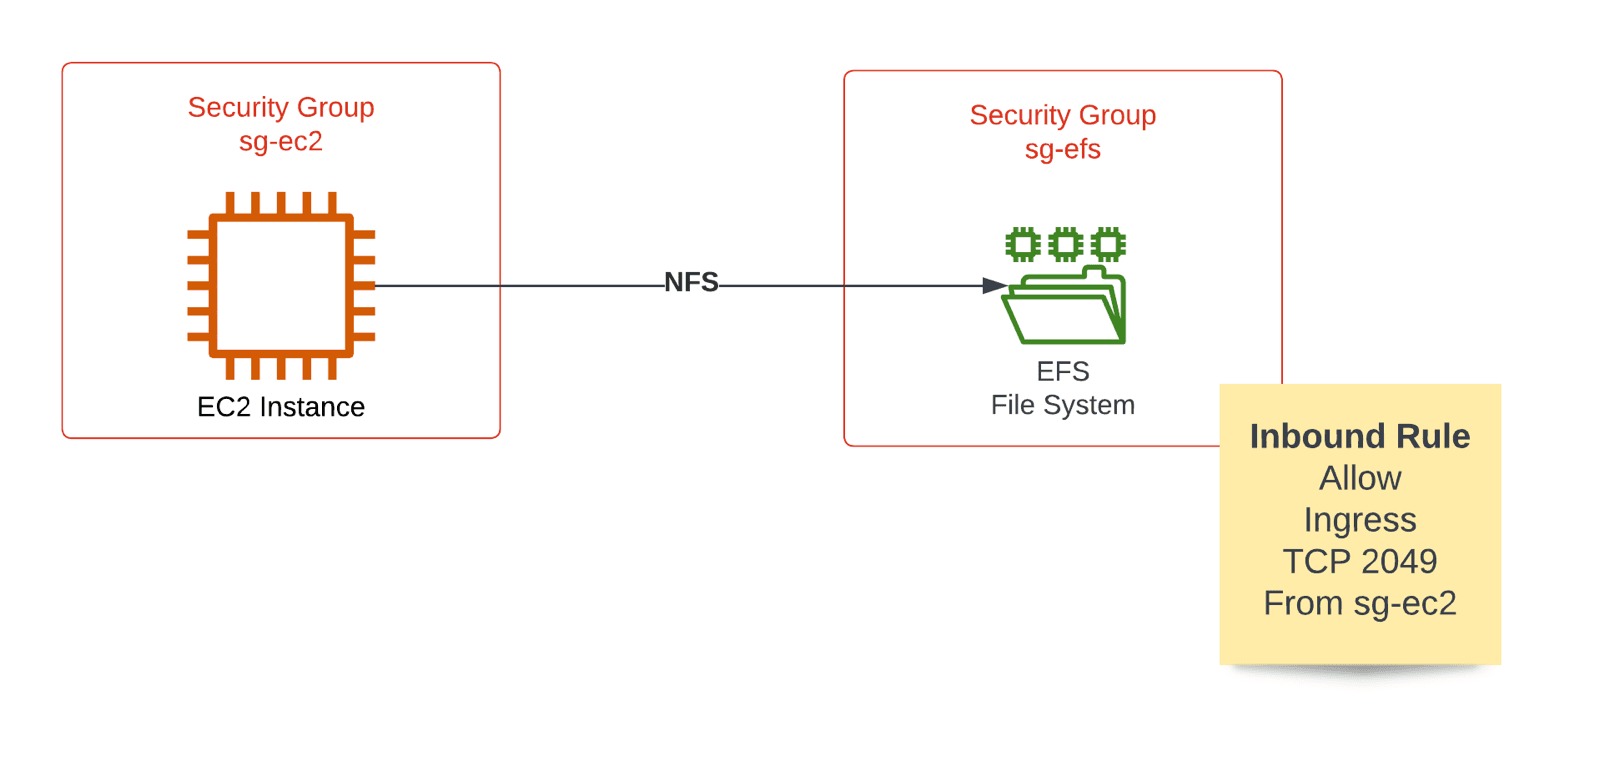 Controlling access to EFS by using security groups